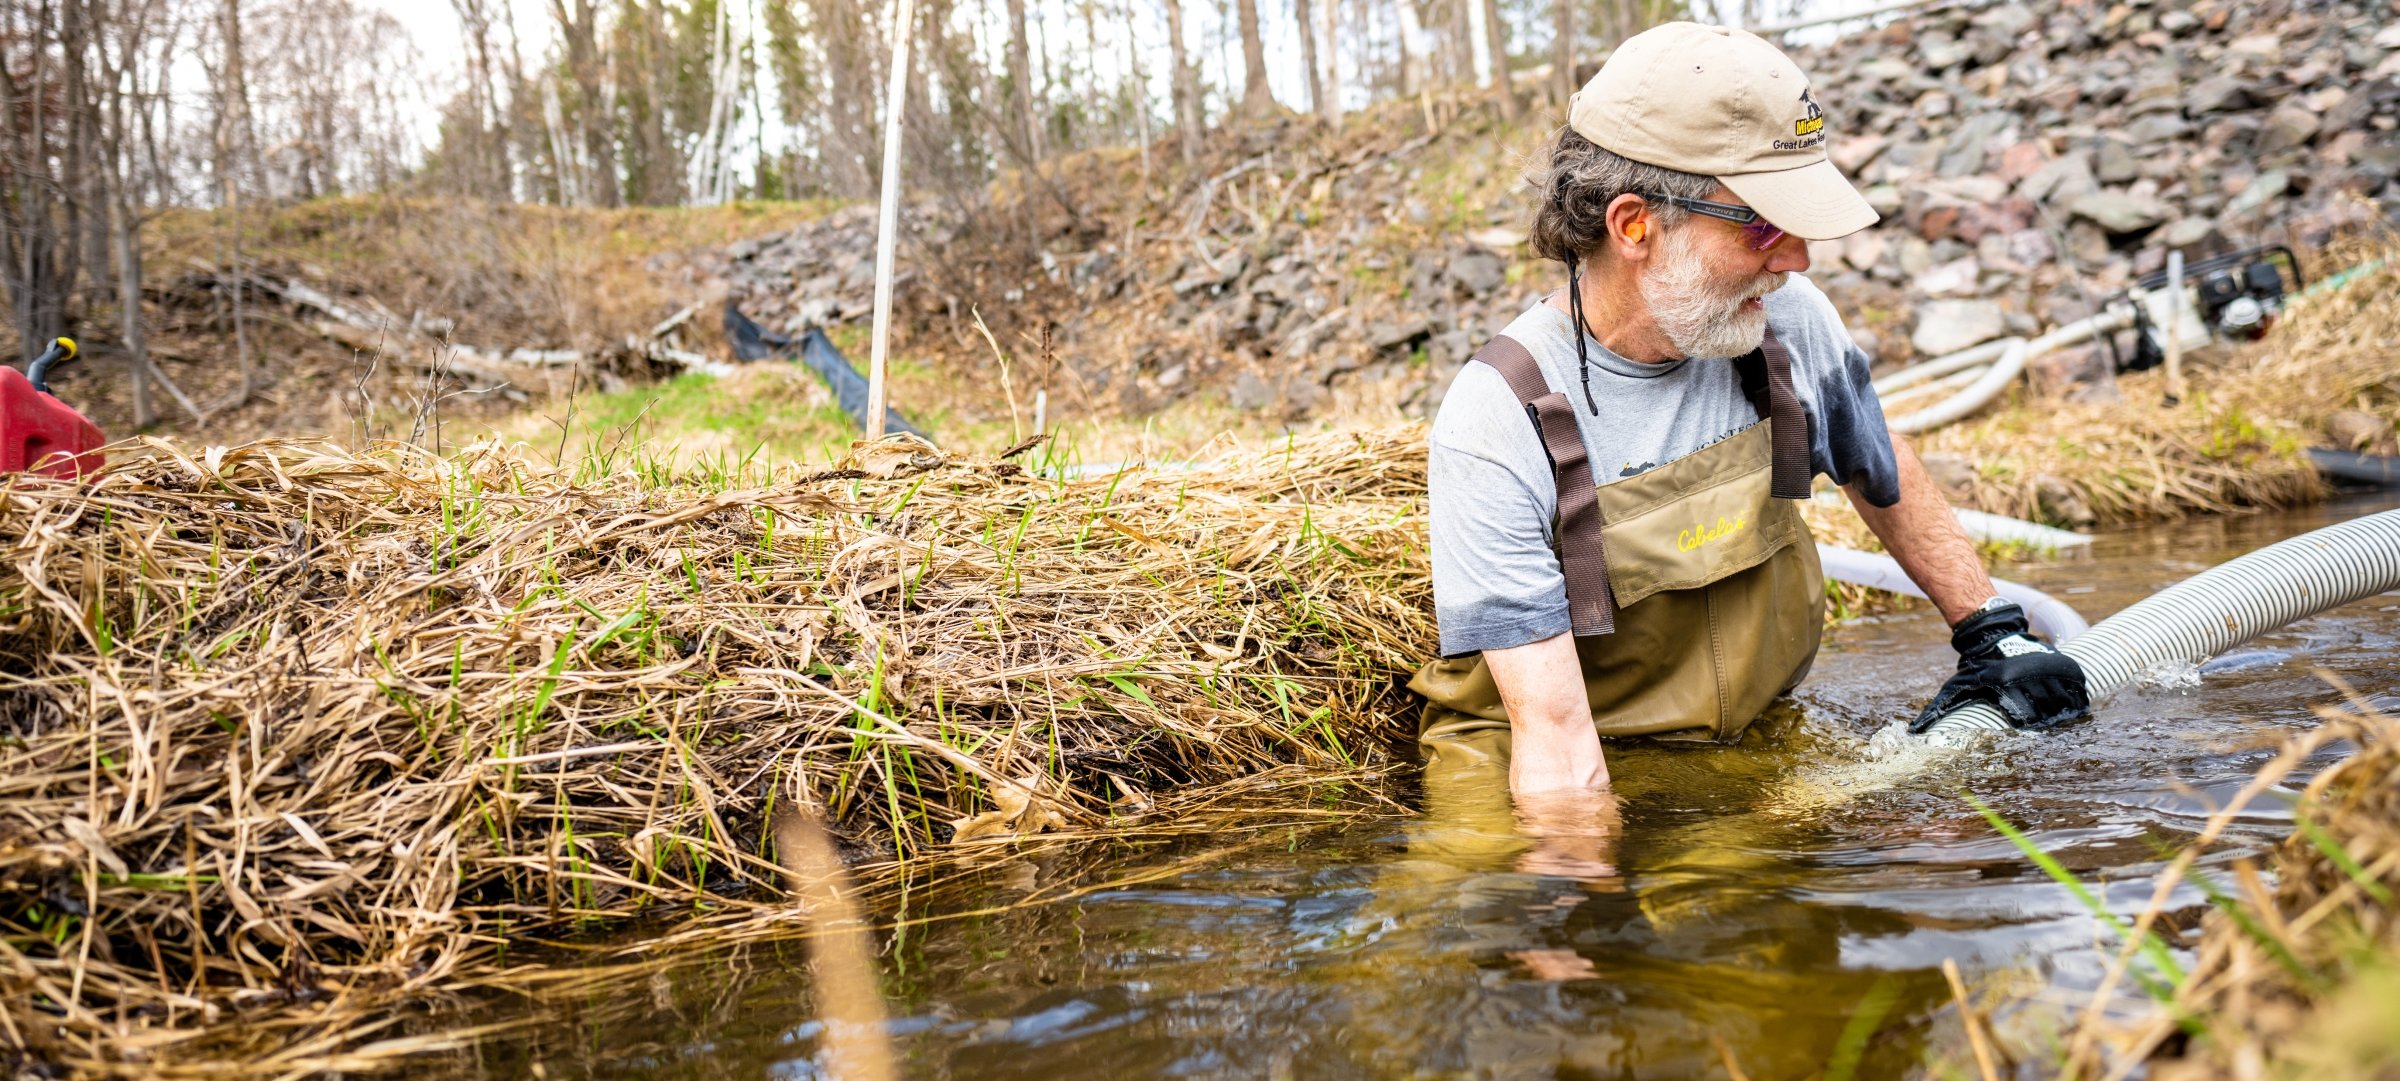 Researcher in waders in a stream holding a pipe underwater